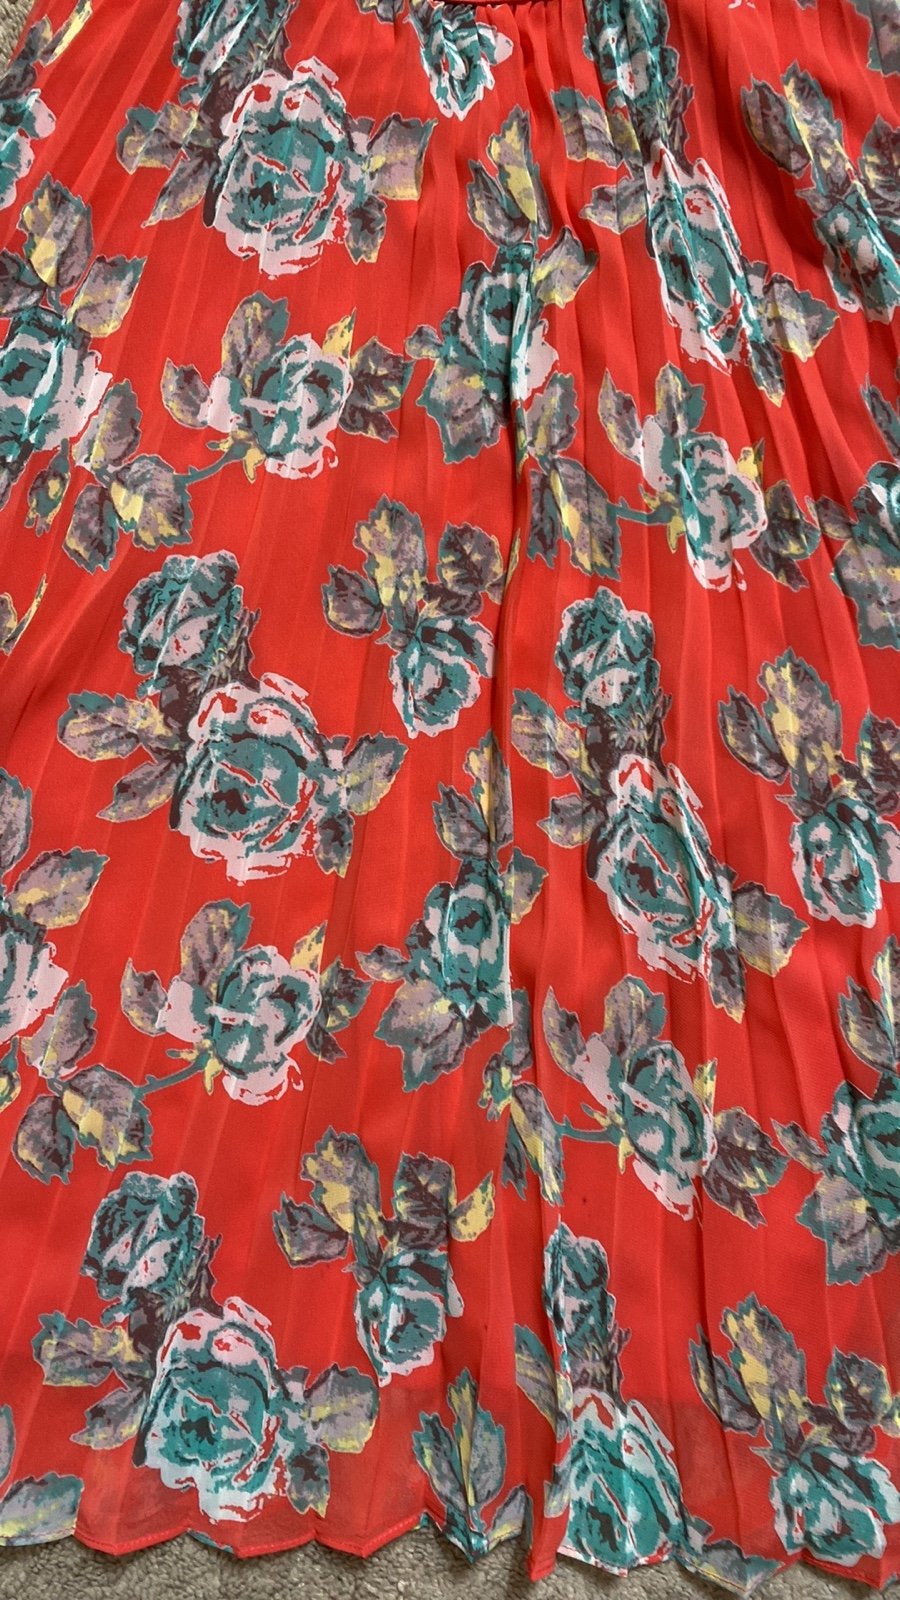 Personality Soprano Red Floral Pleated Midi Skirt oxdNrm3Kz just buy it